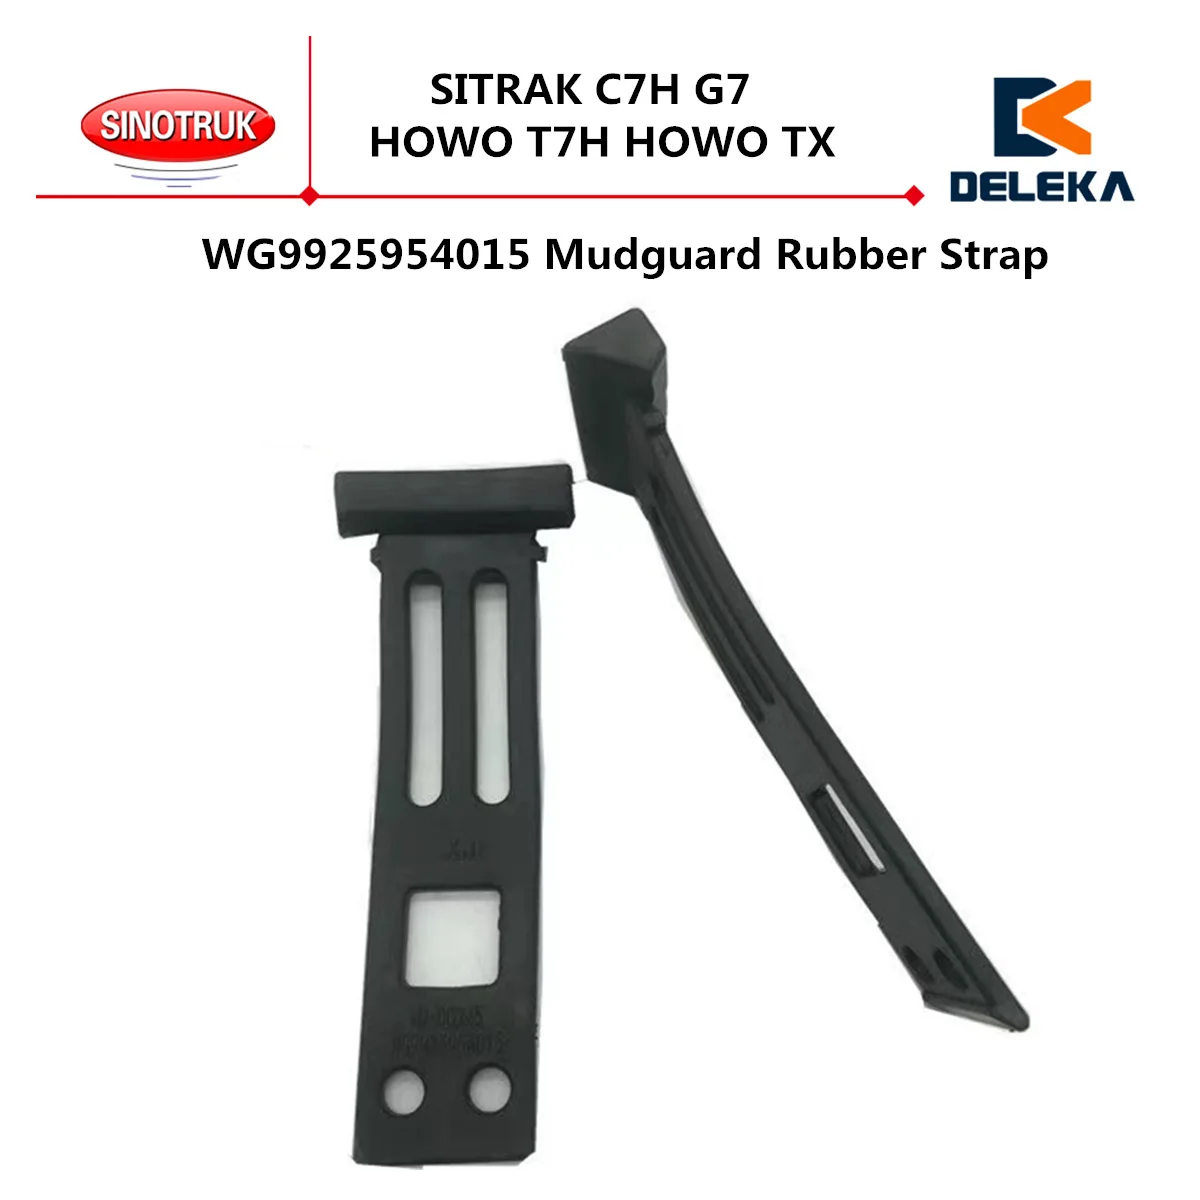 1 pic WG9925954015 Mudguard Rubber Strap For CNHTC Sinotruk SITRAK C7H G7 HOWO T7H HOWO TX Rear Wheel for cnhtc sinotruk truck parts sitrak howo t7h t5g tx 812w46430 0050 steering wheel horn contact ring hairspring